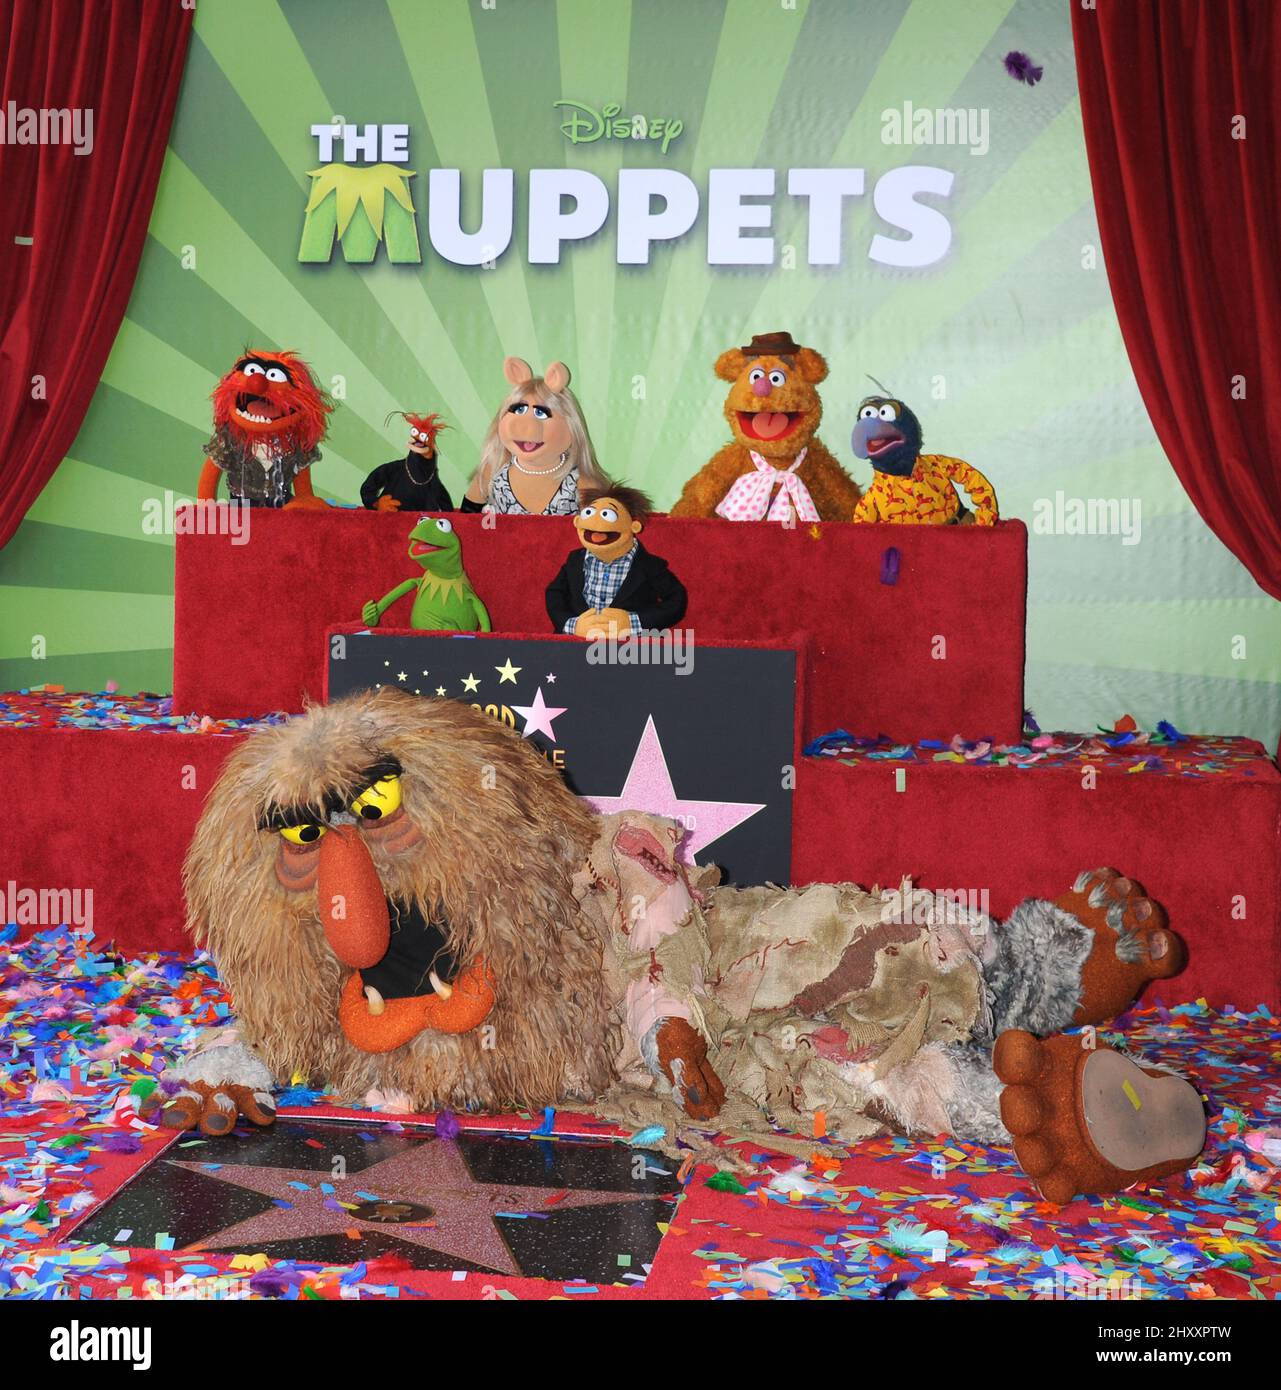 The Muppets, Animal, Pepe, Miss Piggy, Fozzie, Gonzo, Kermit, Walter and Sweetums at The Muppets Hollywood Walk of Fame Star Ceremony in Los Angeles Stock Photo